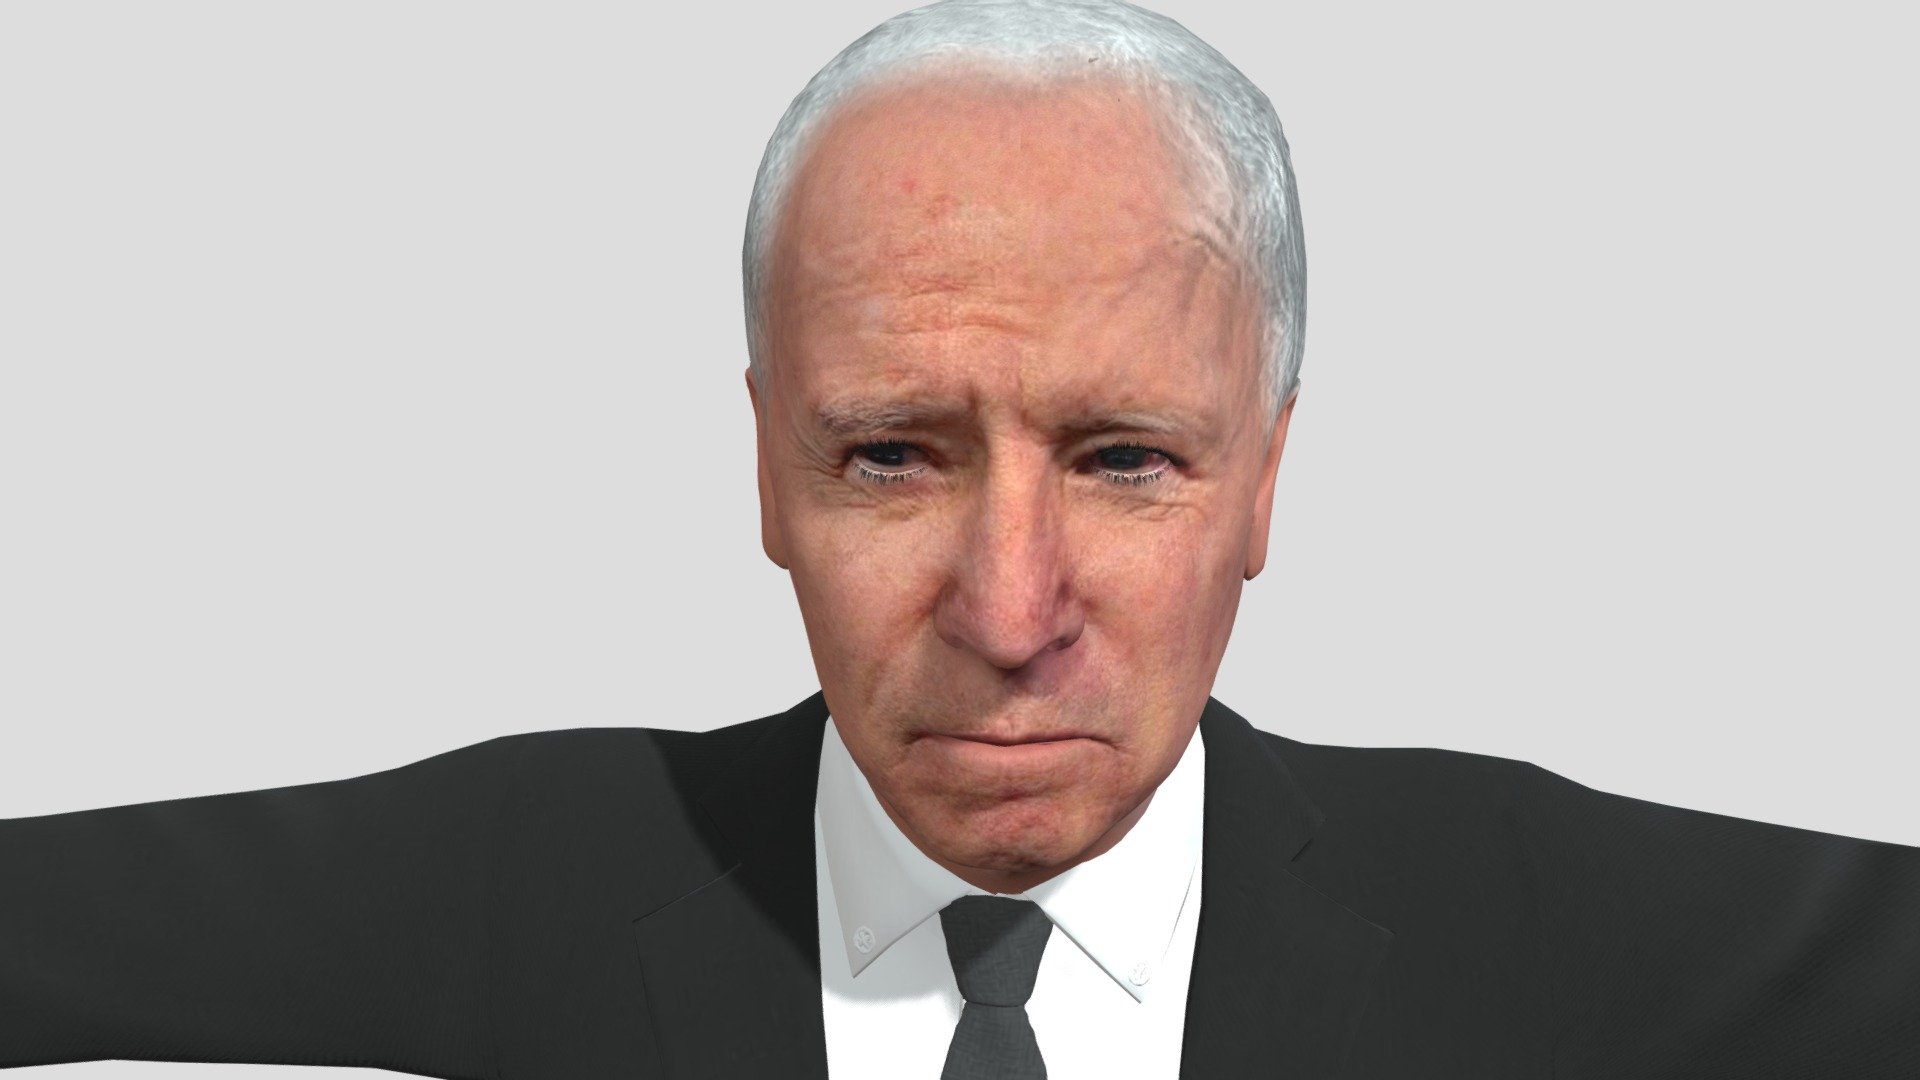 Joseph Robinette Biden Jr. is an American politician who is the 46th and current president of the United States. A member of the Democratic Party 3d model